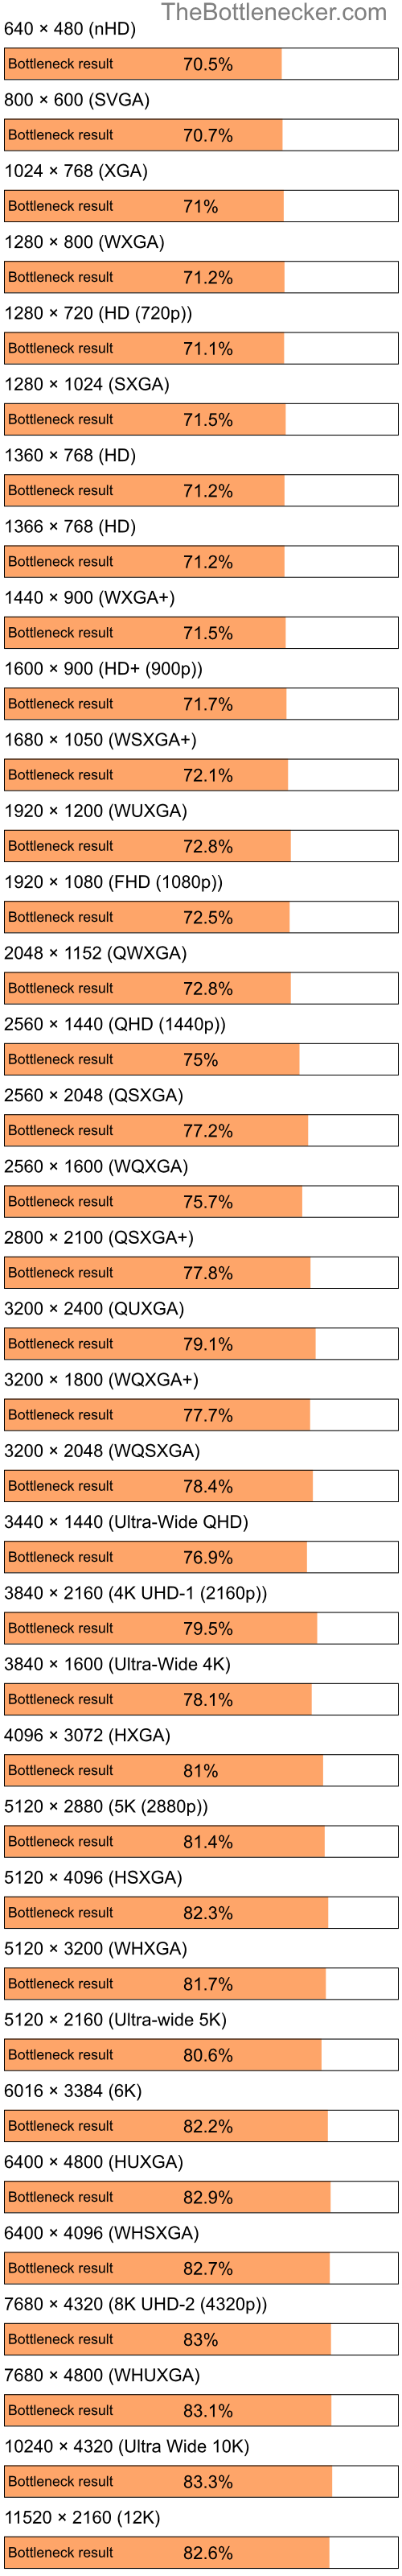 Bottleneck results by resolution for Intel Atom Z520 and NVIDIA Quadro FX 370M in Graphic Card Intense Tasks